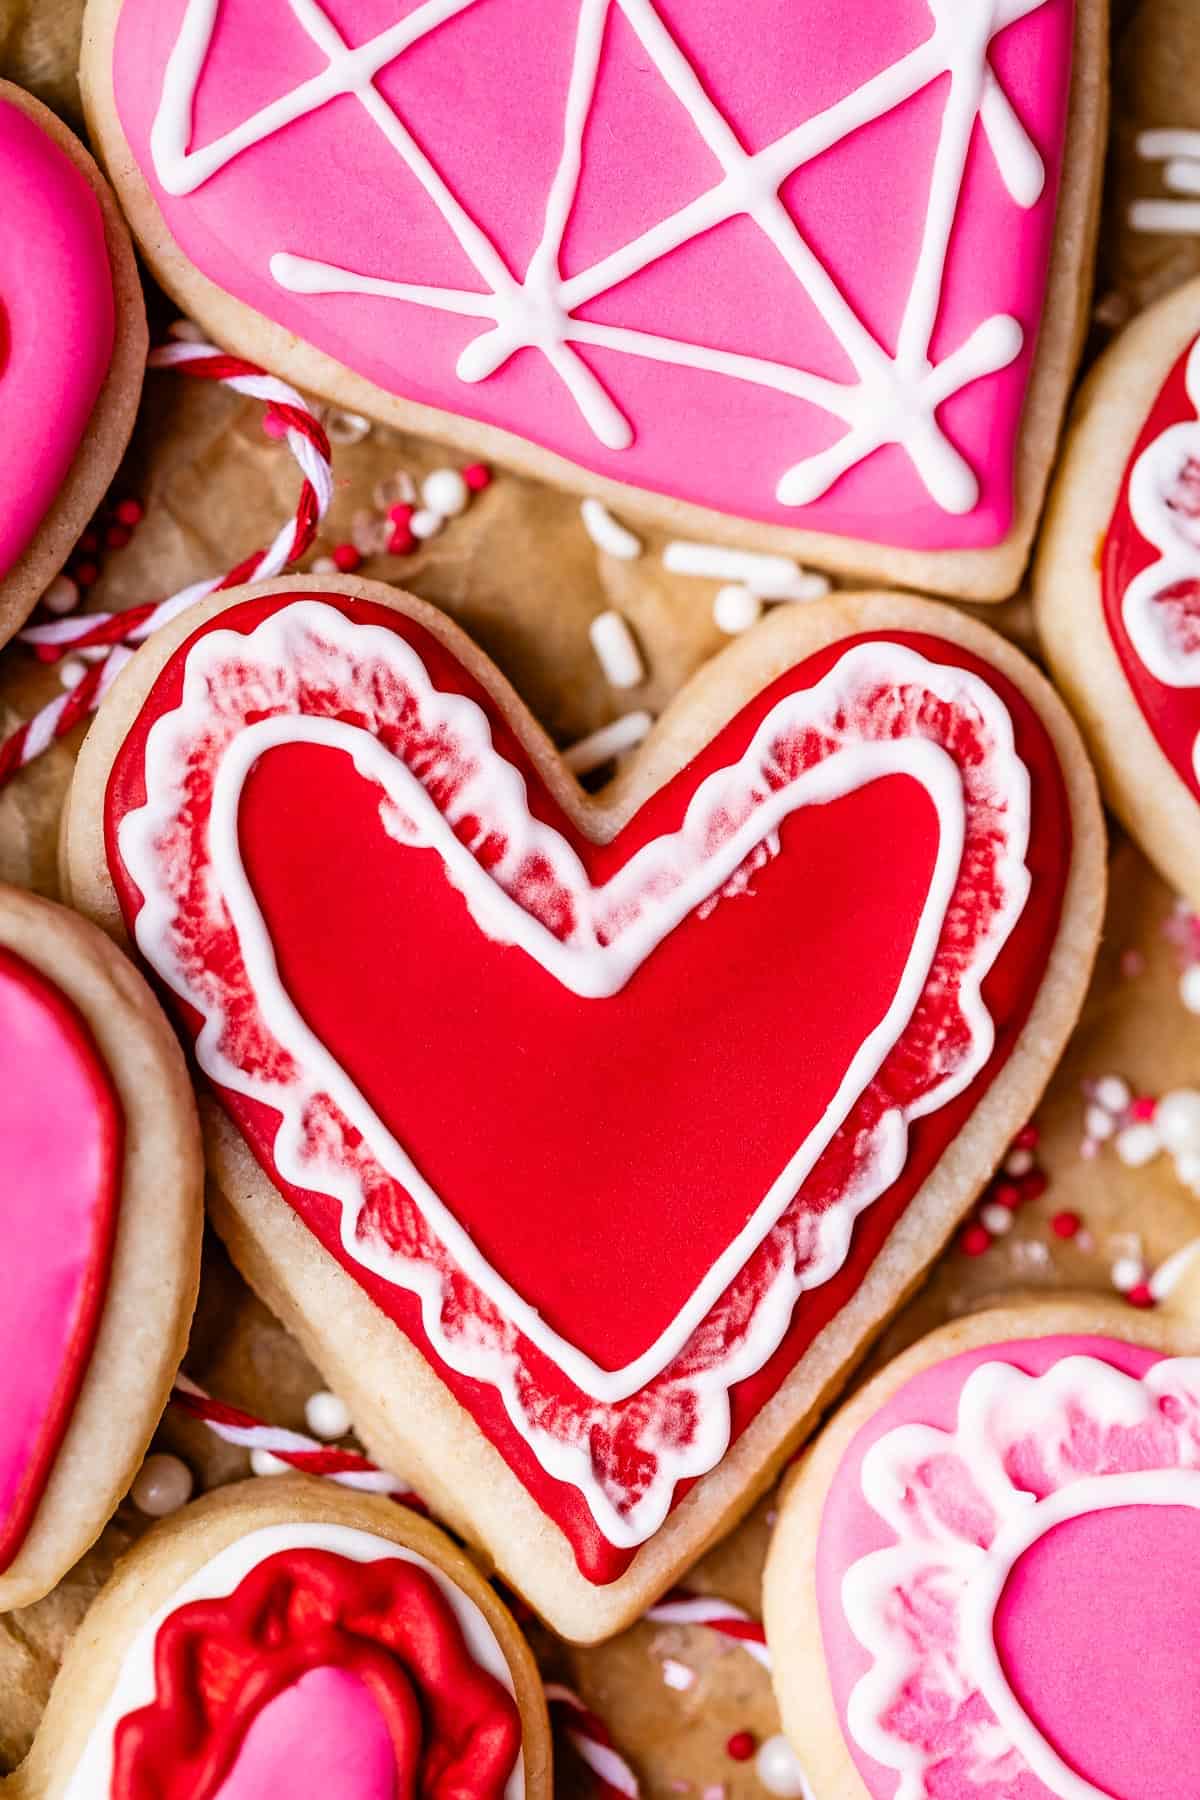 recipe for royal icing, shown on heart shaped sugar cookies.